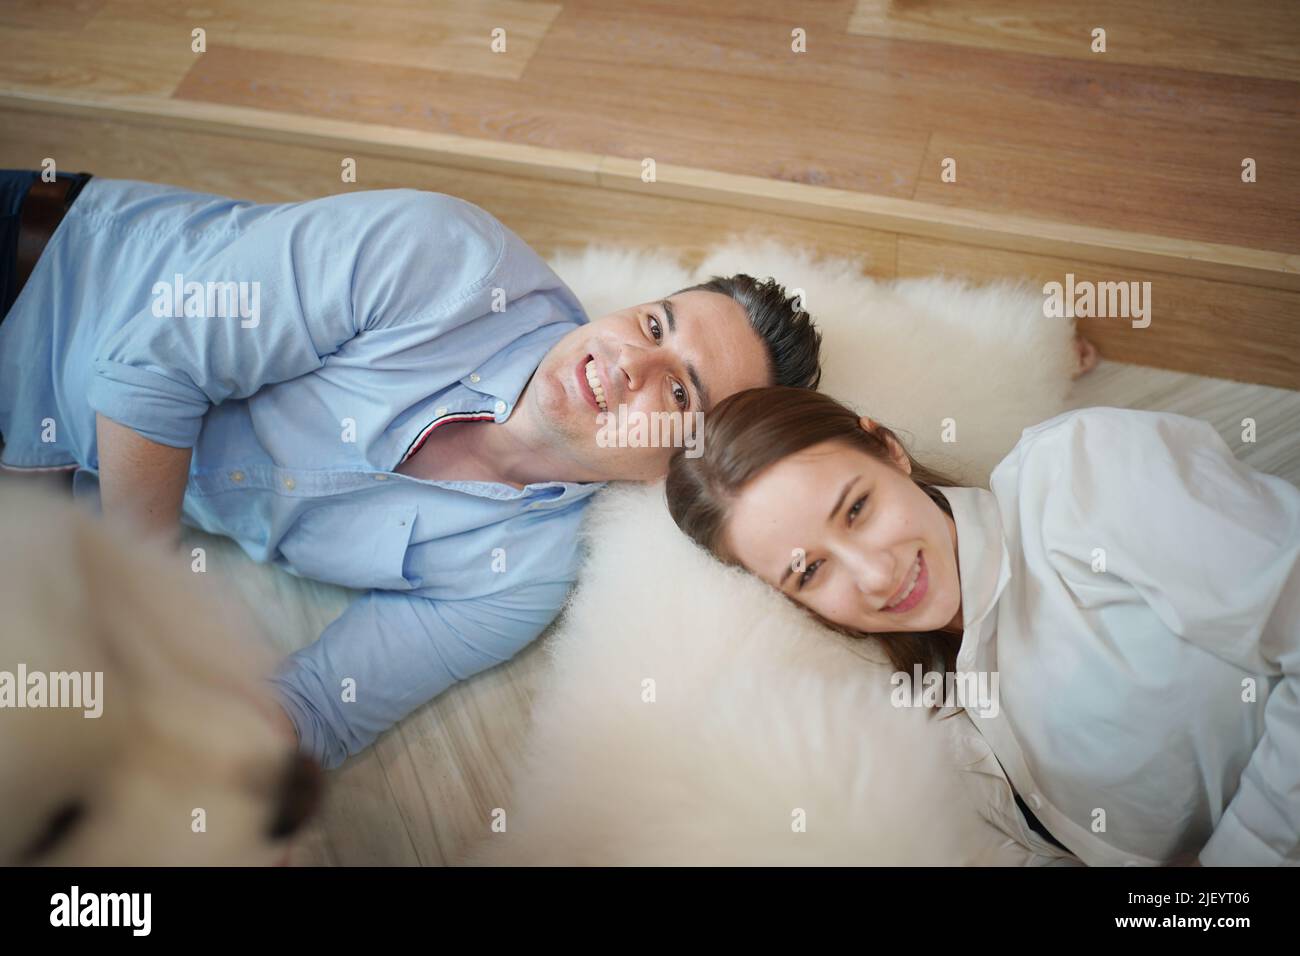 Man and girl with his pet dog playing on the floor. Happy dog, happy guy with dog. Stock Photo